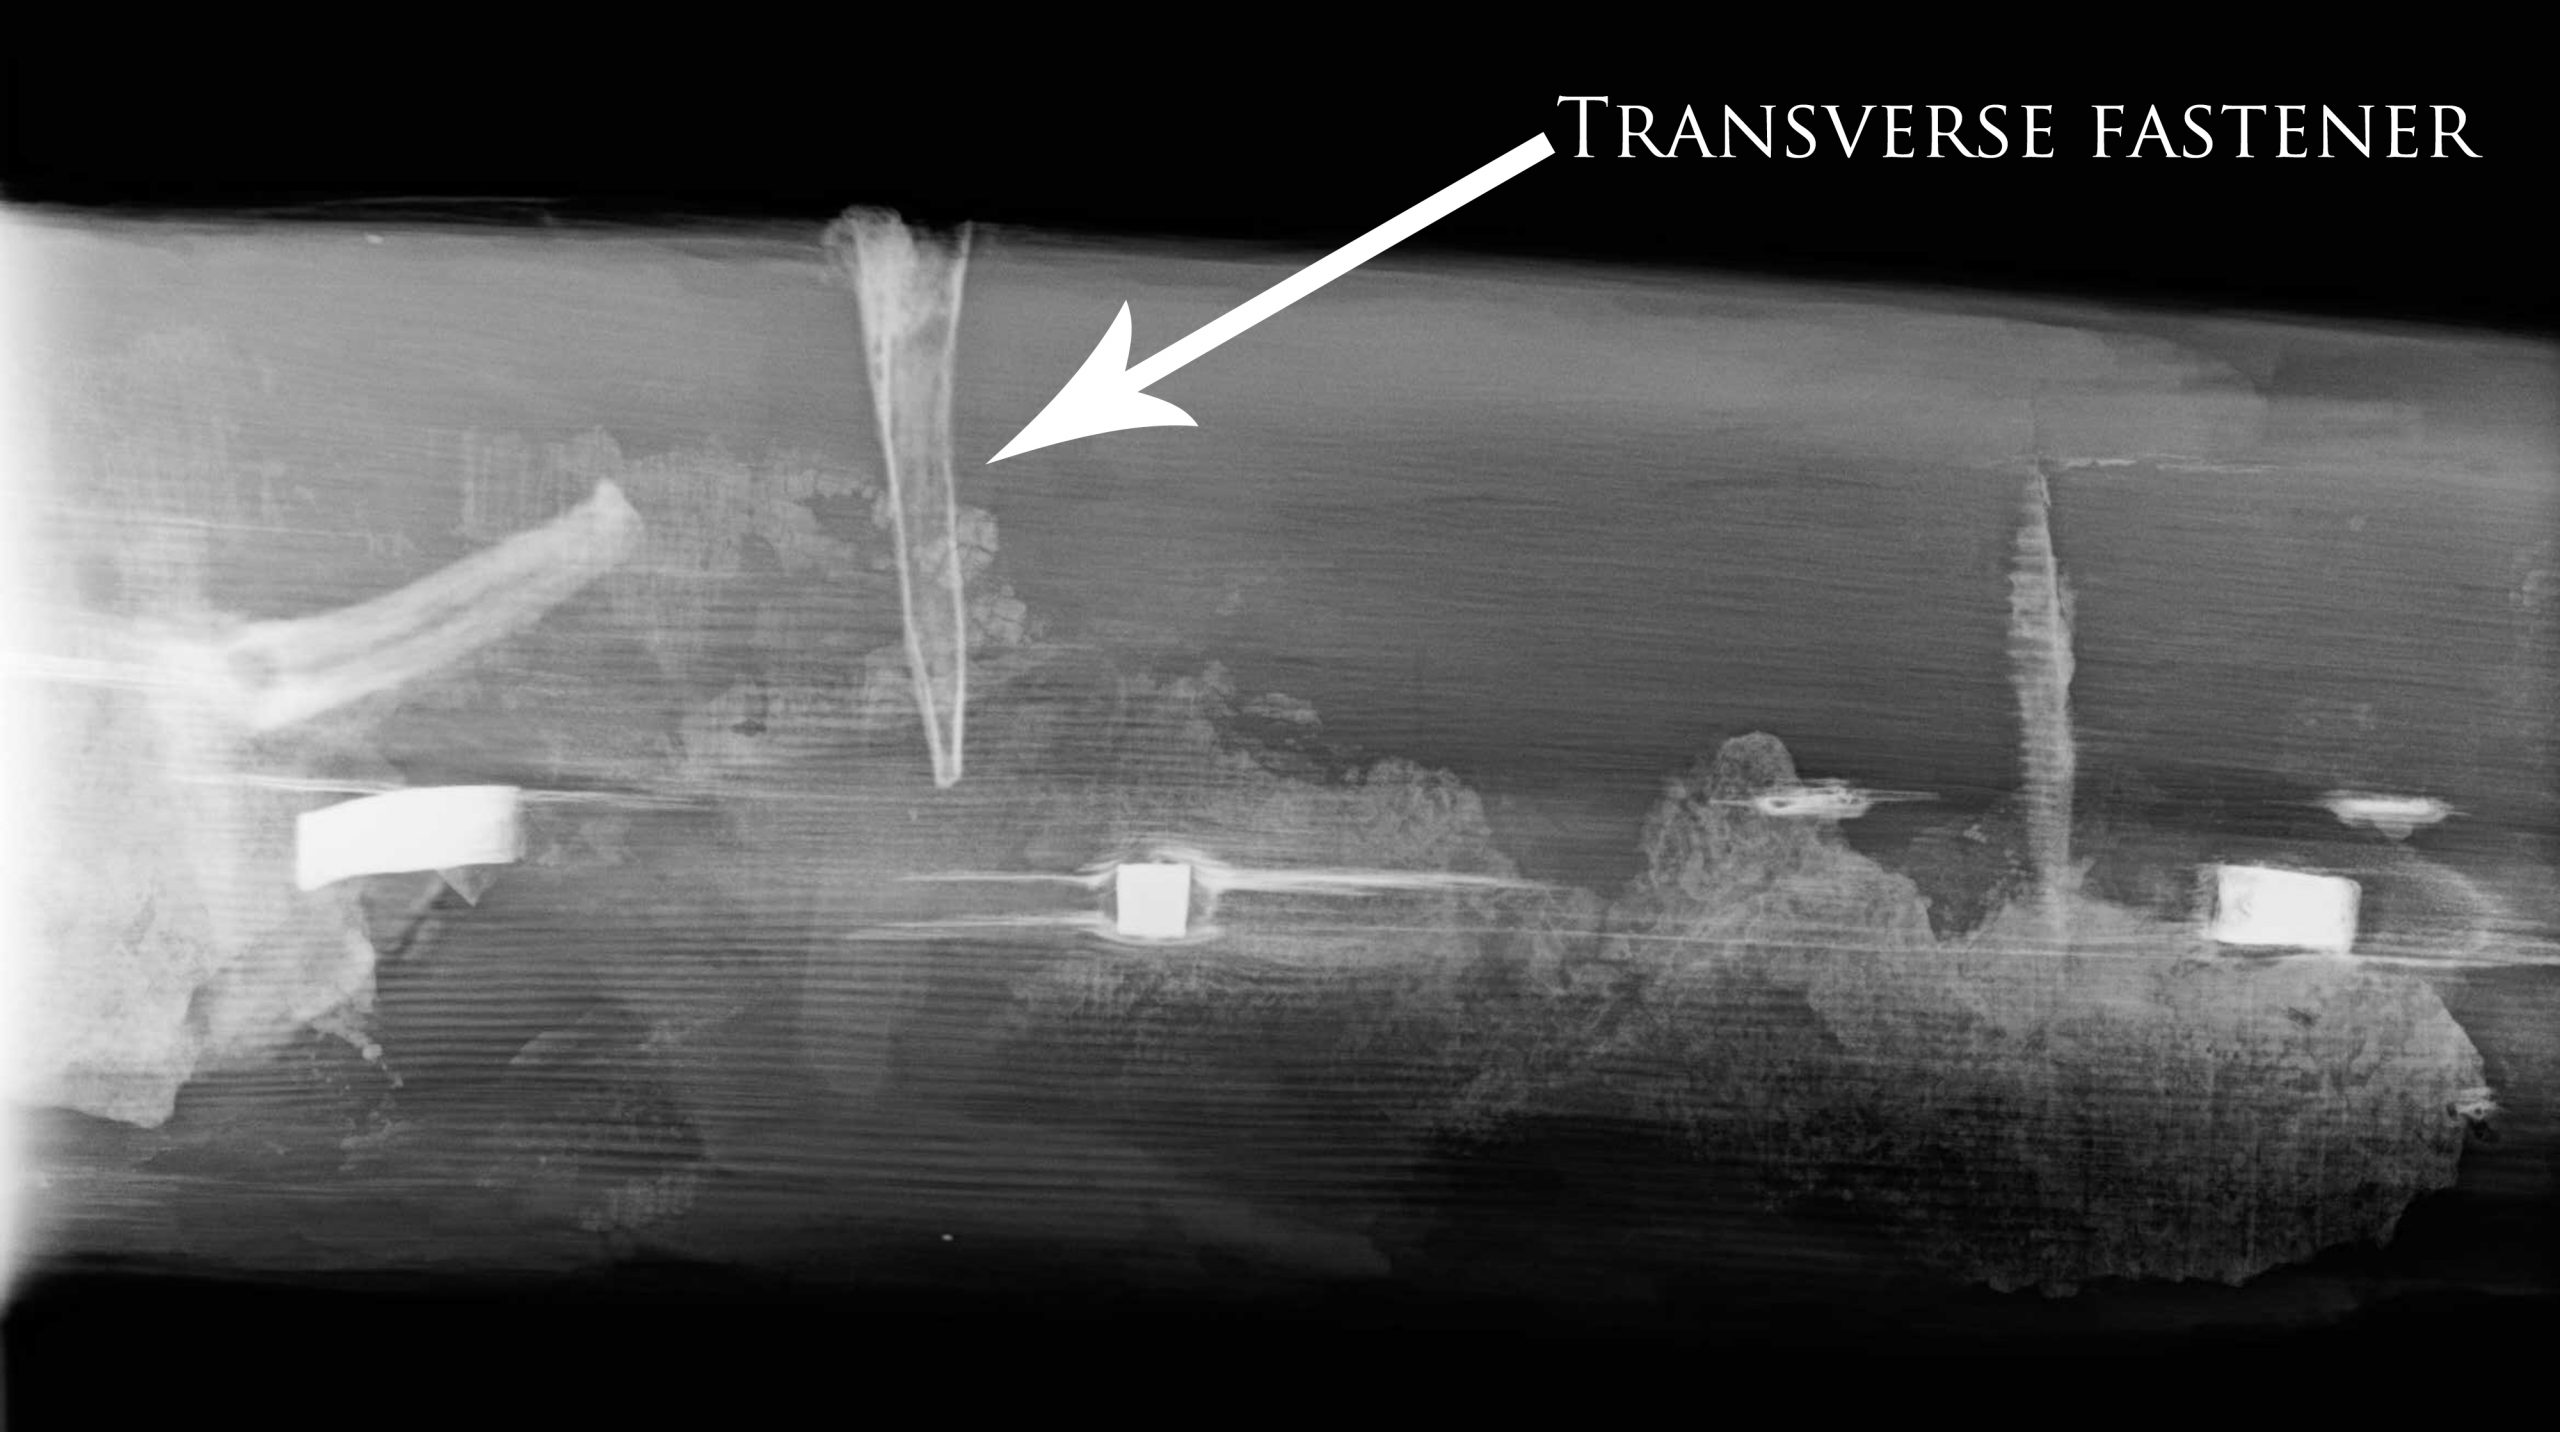 X-ray of ship showing pattern of fasteners used in building